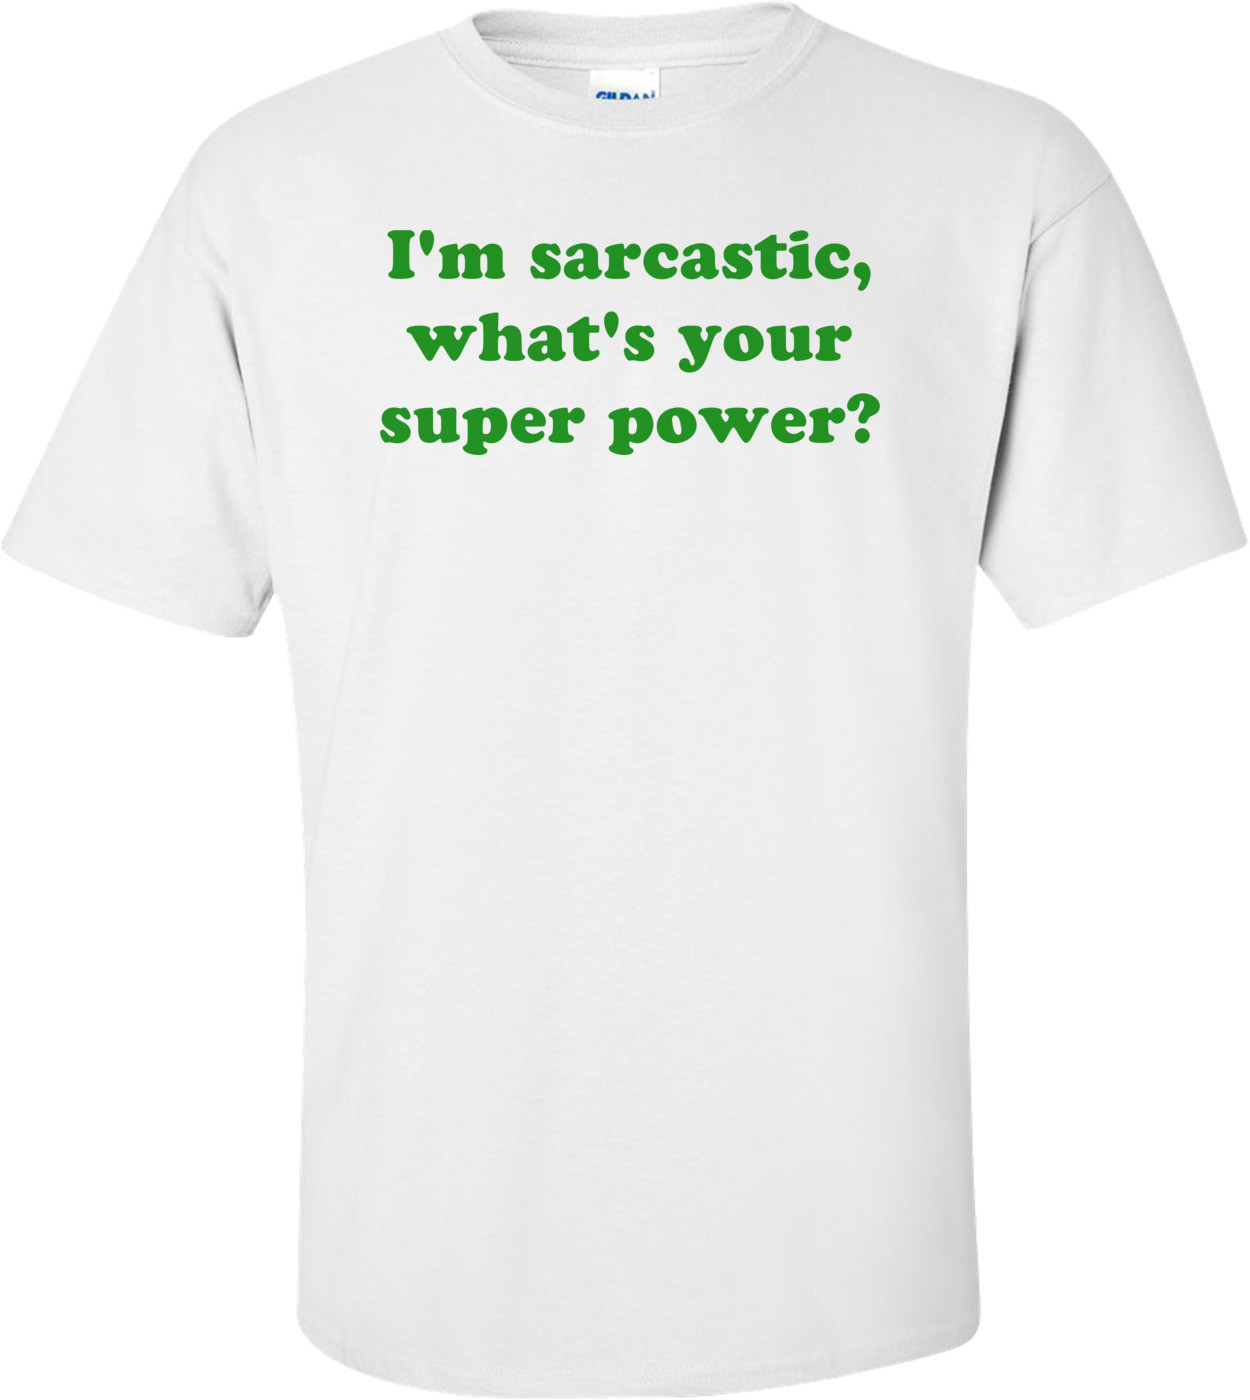 I'm sarcastic, what's your super power?